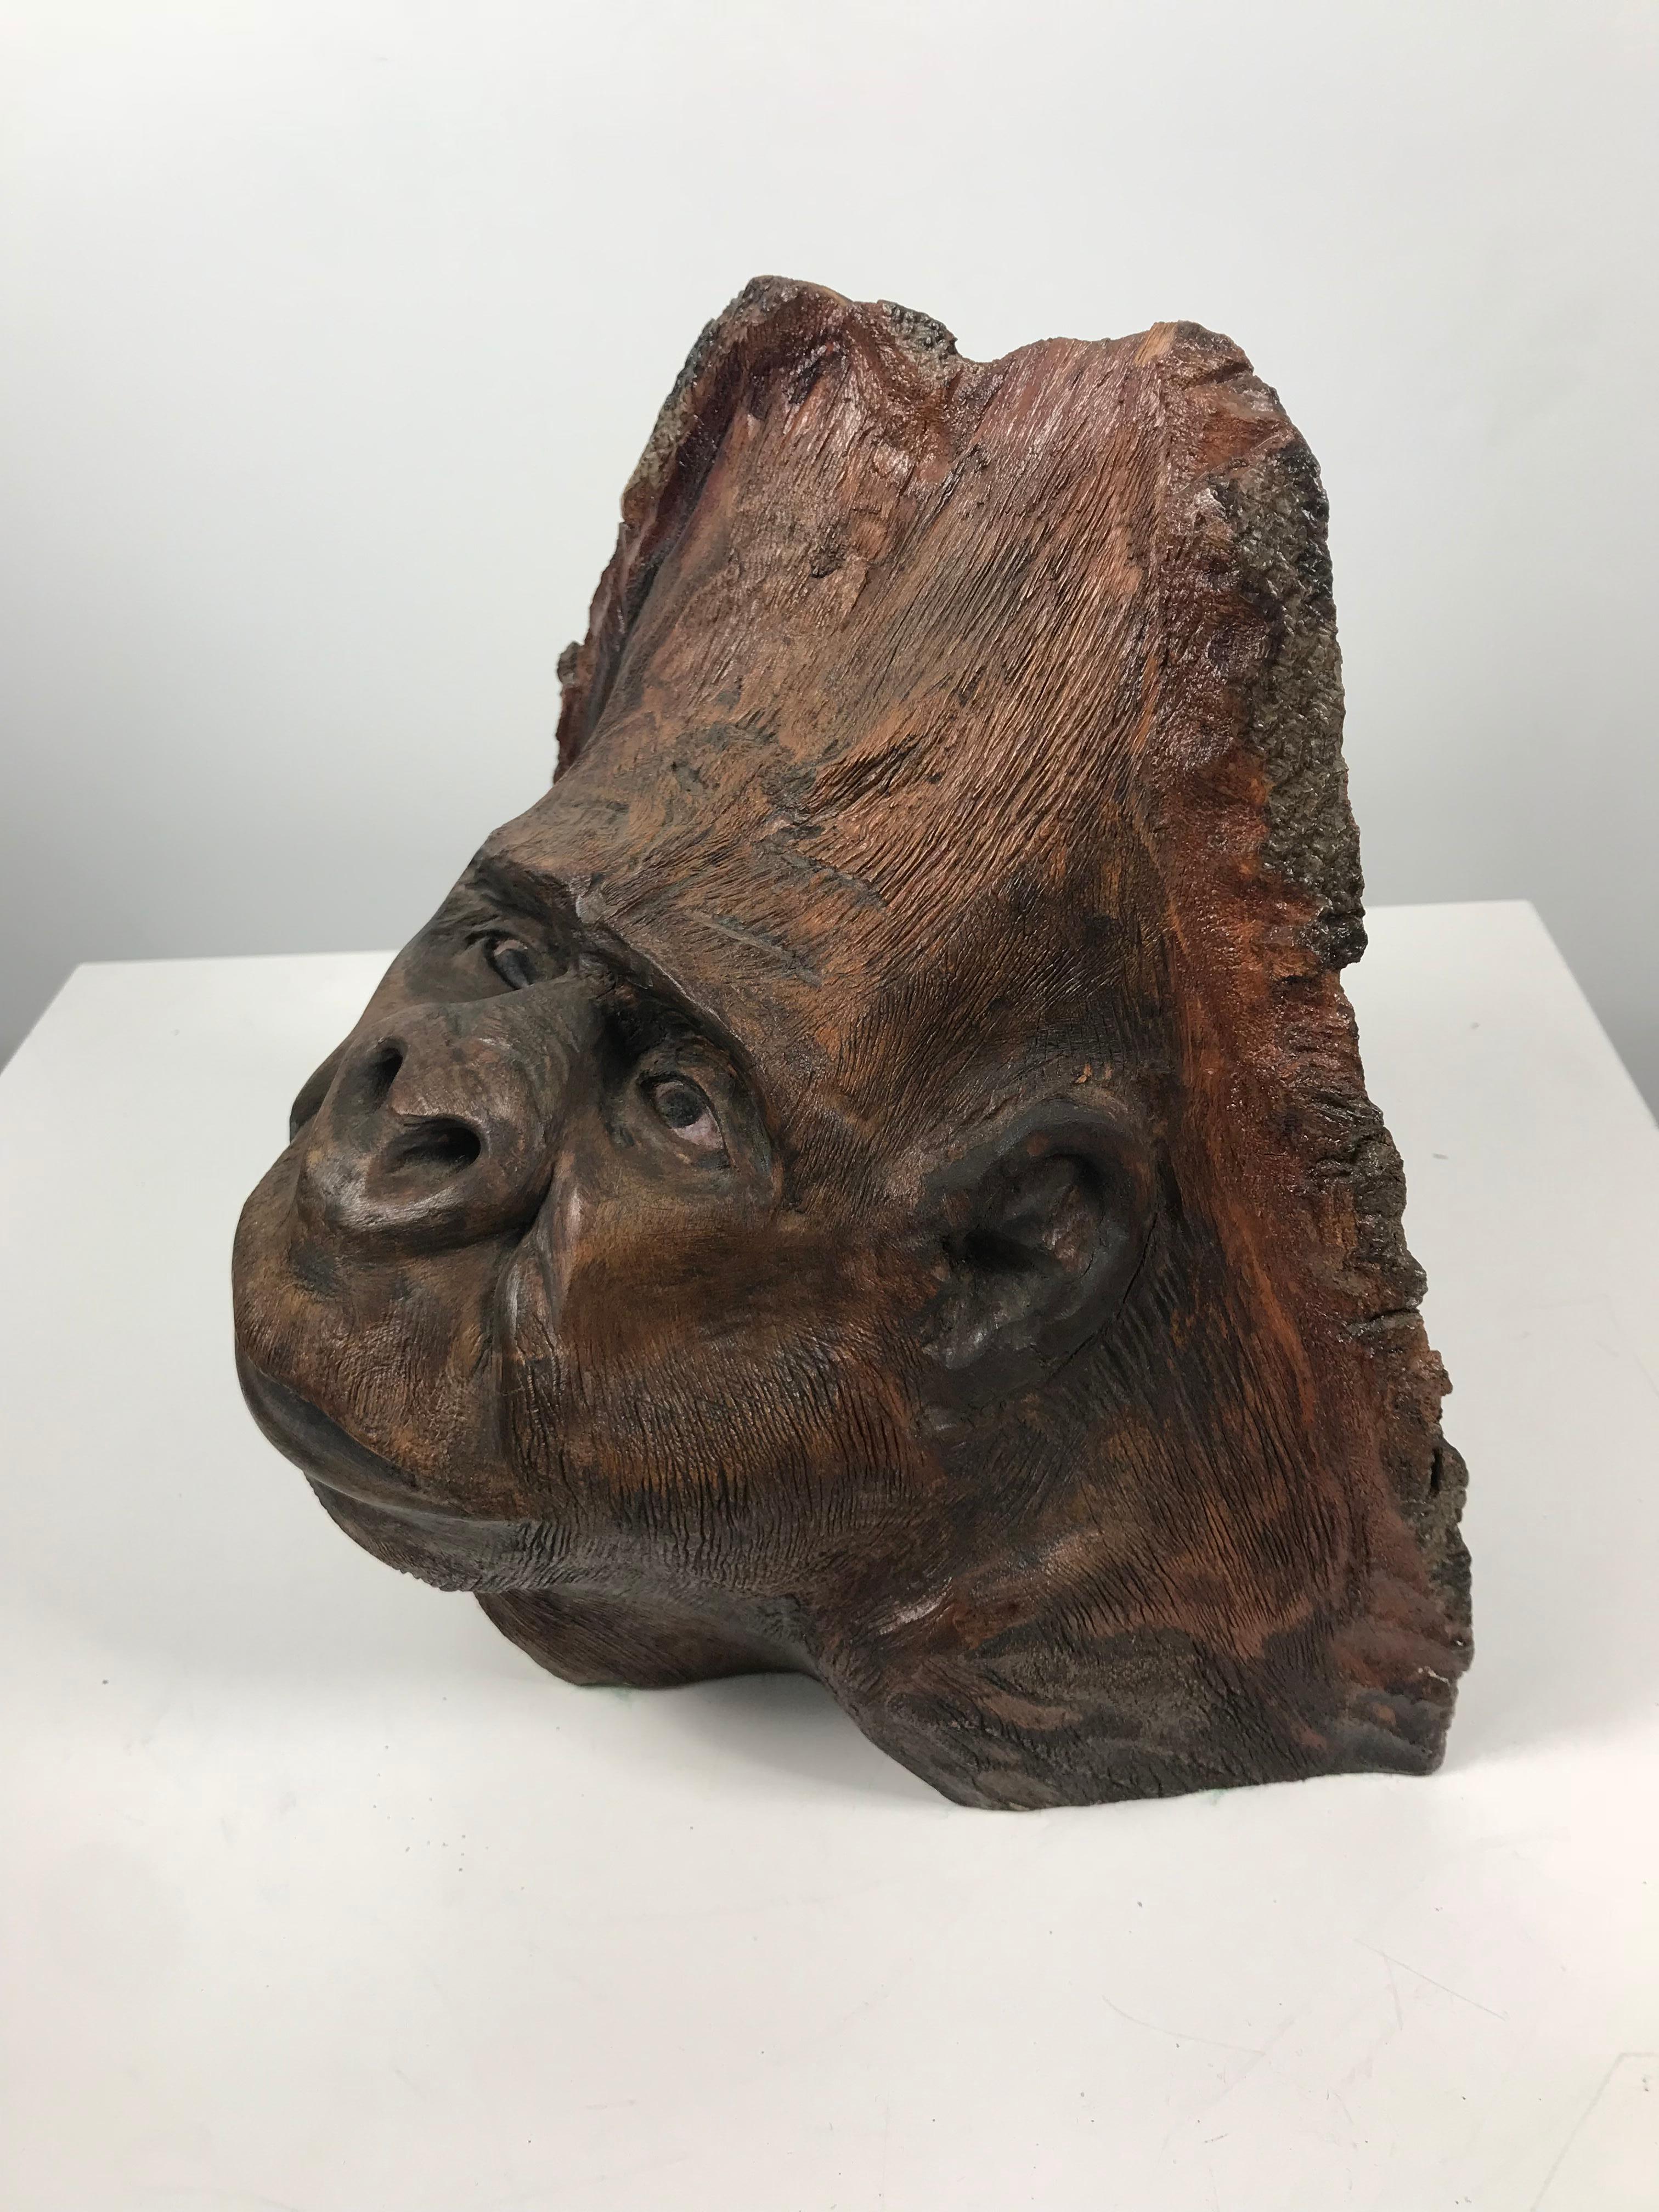 Unusual hand-carved from knot of a tree, Folk Art sculpture depicting a gorilla face, head, amazing life-like image, extremely well executed.